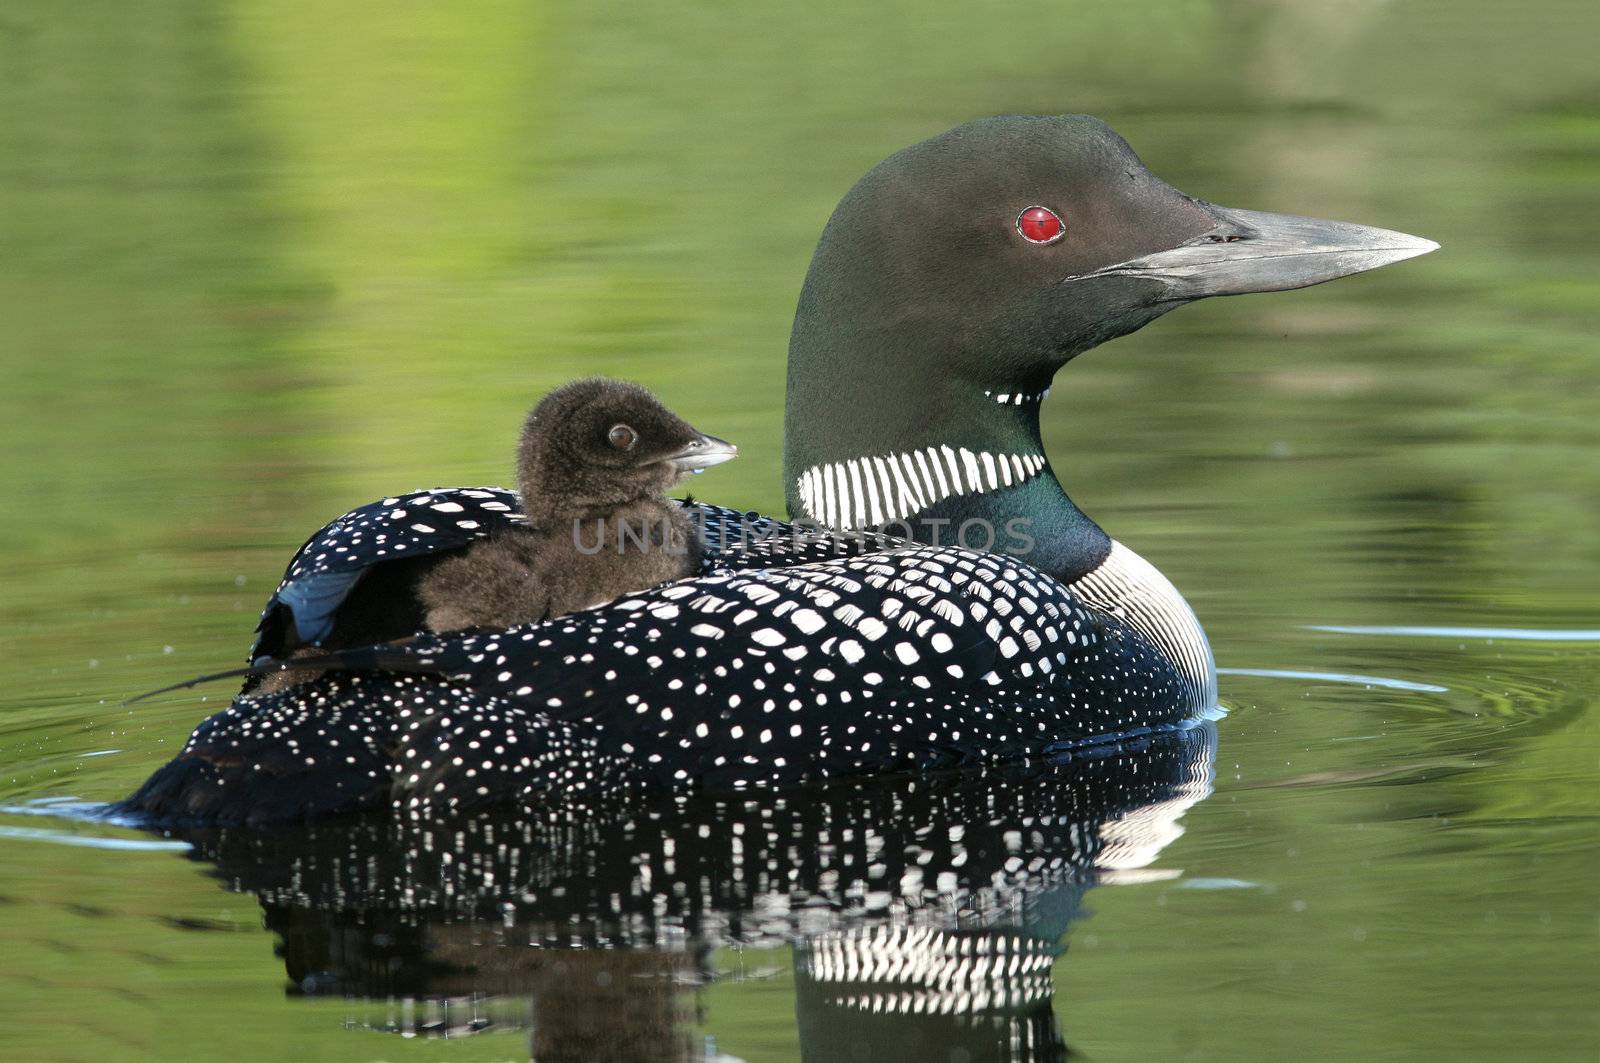 Baby Loon (Gavia immer) riding on mother’s back by gonepaddling